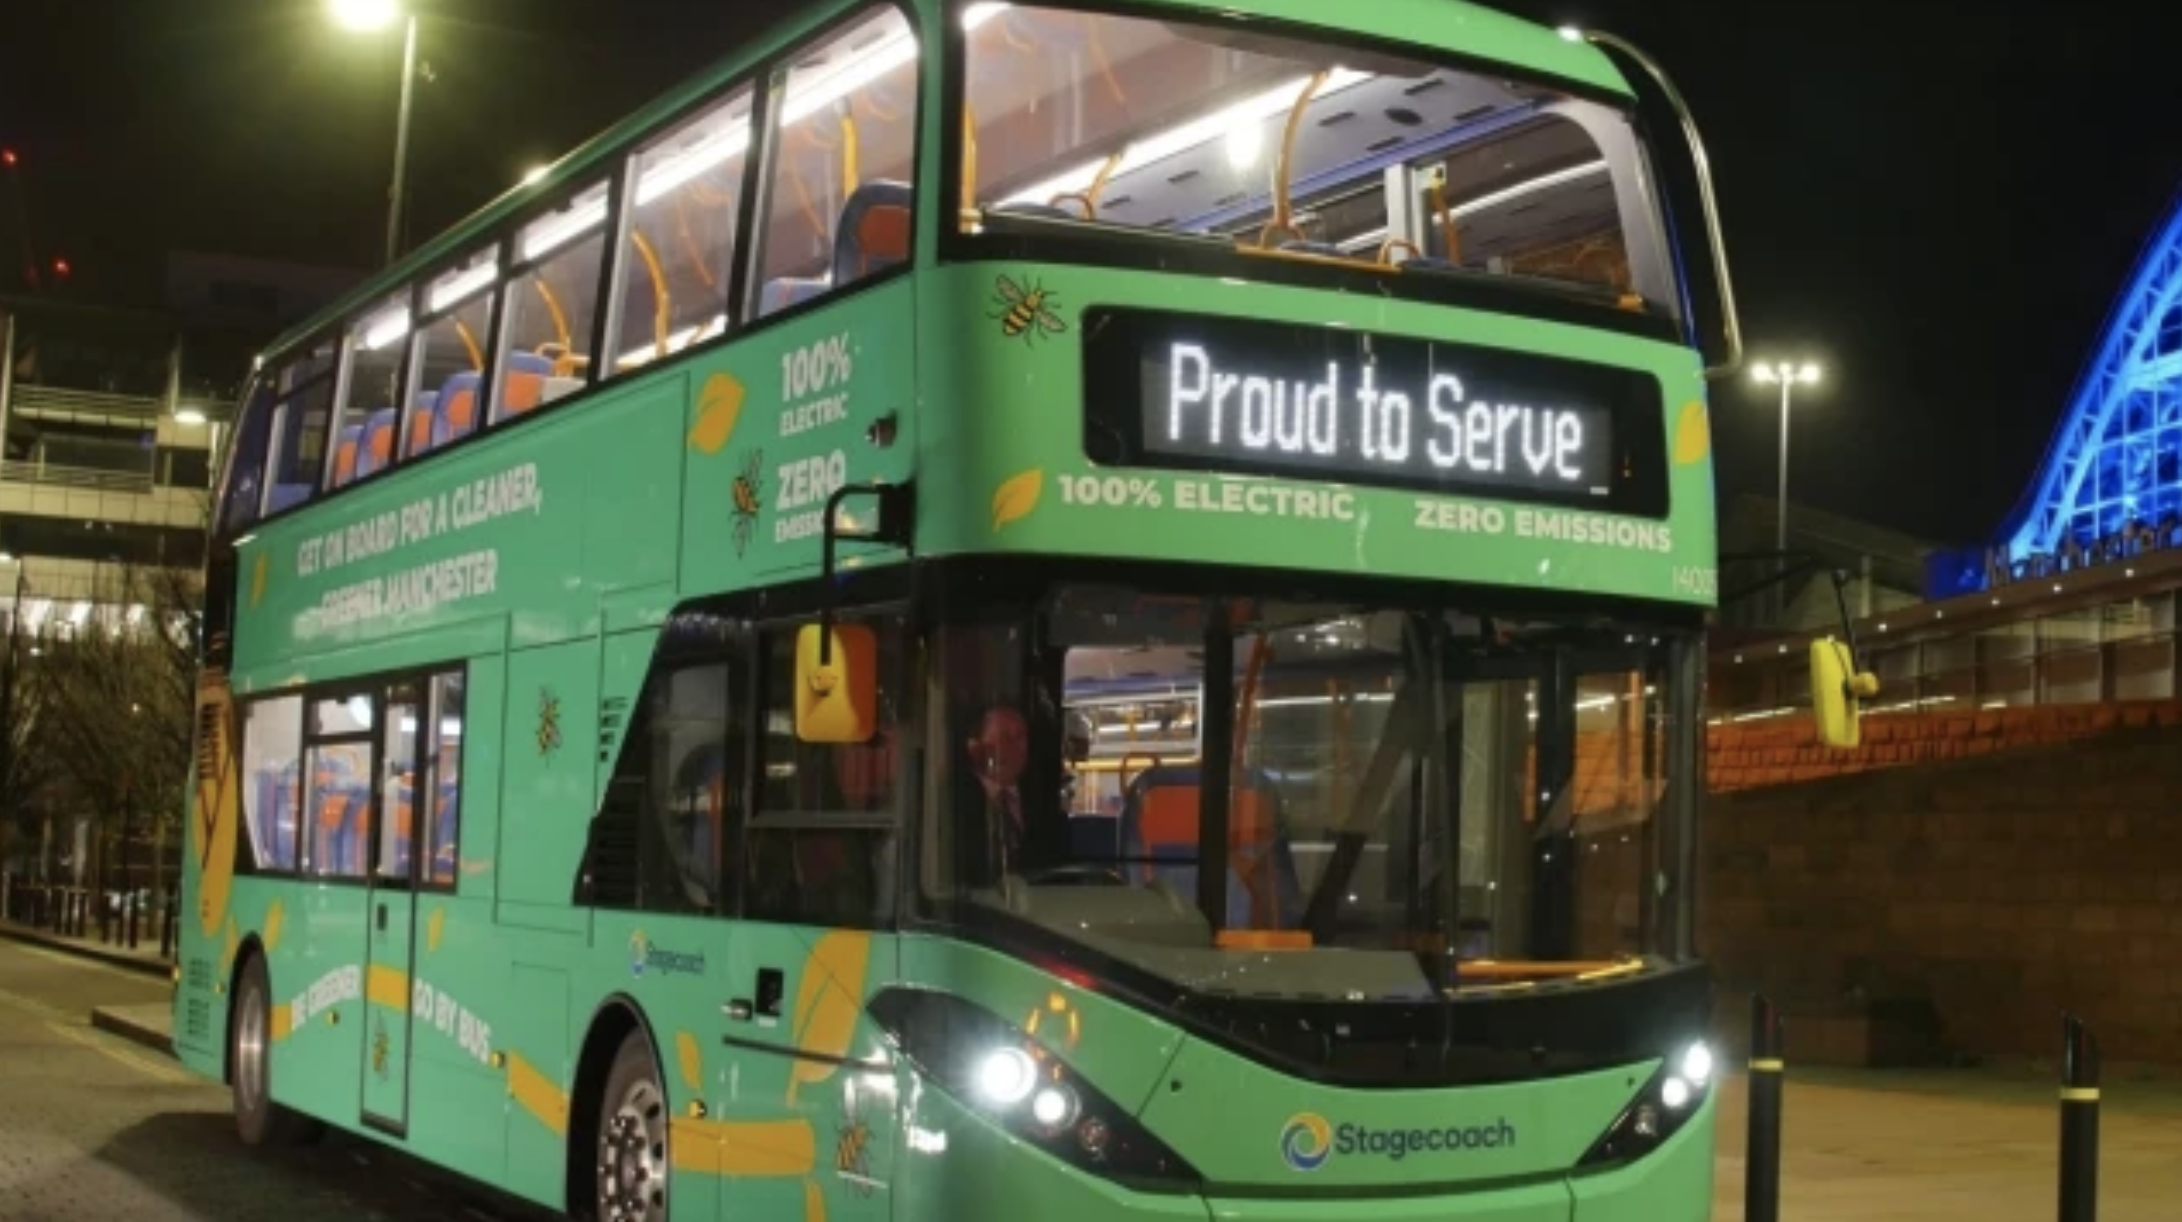 Two types of electric bus are to be introduced to depots throughout England (Photo: Stagecoach)